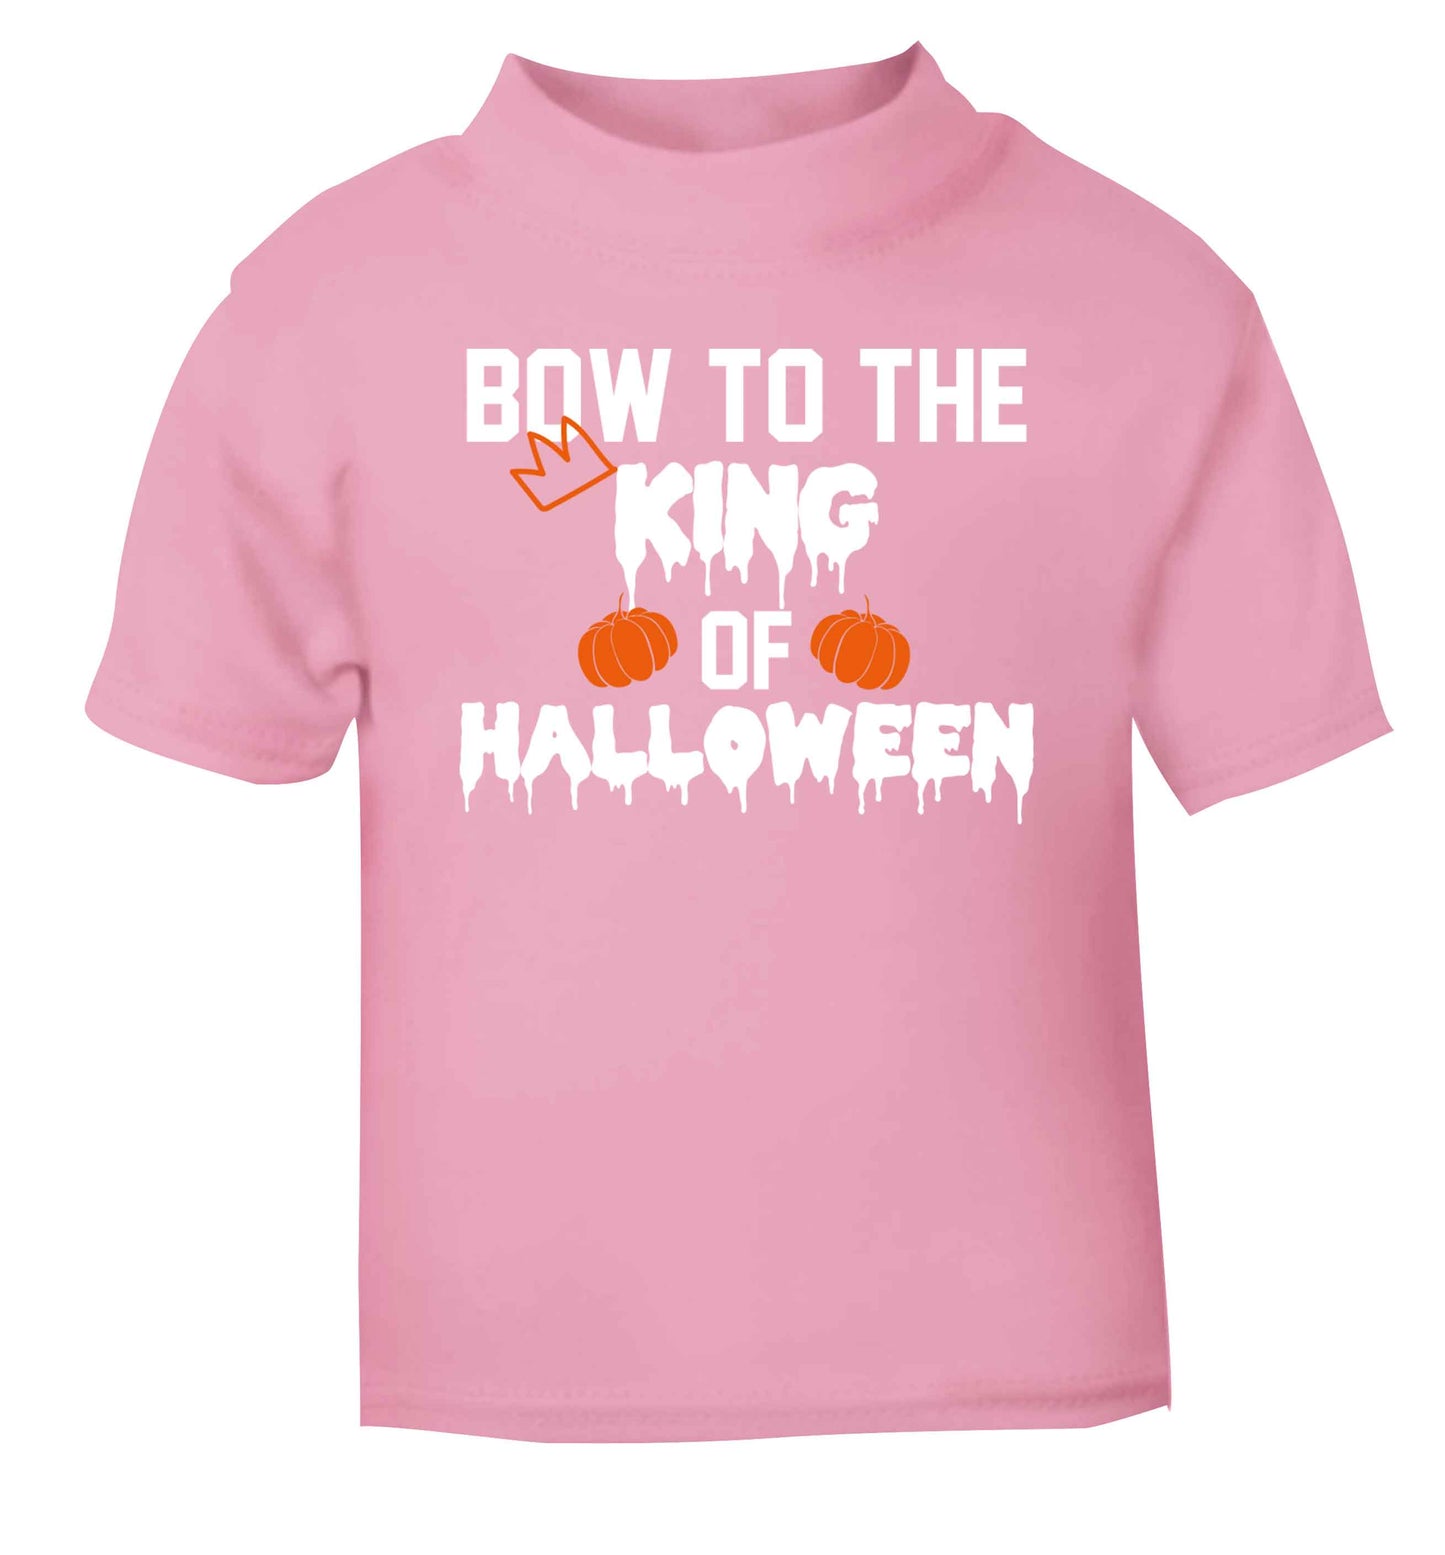 Bow to the King of halloween light pink baby toddler Tshirt 2 Years